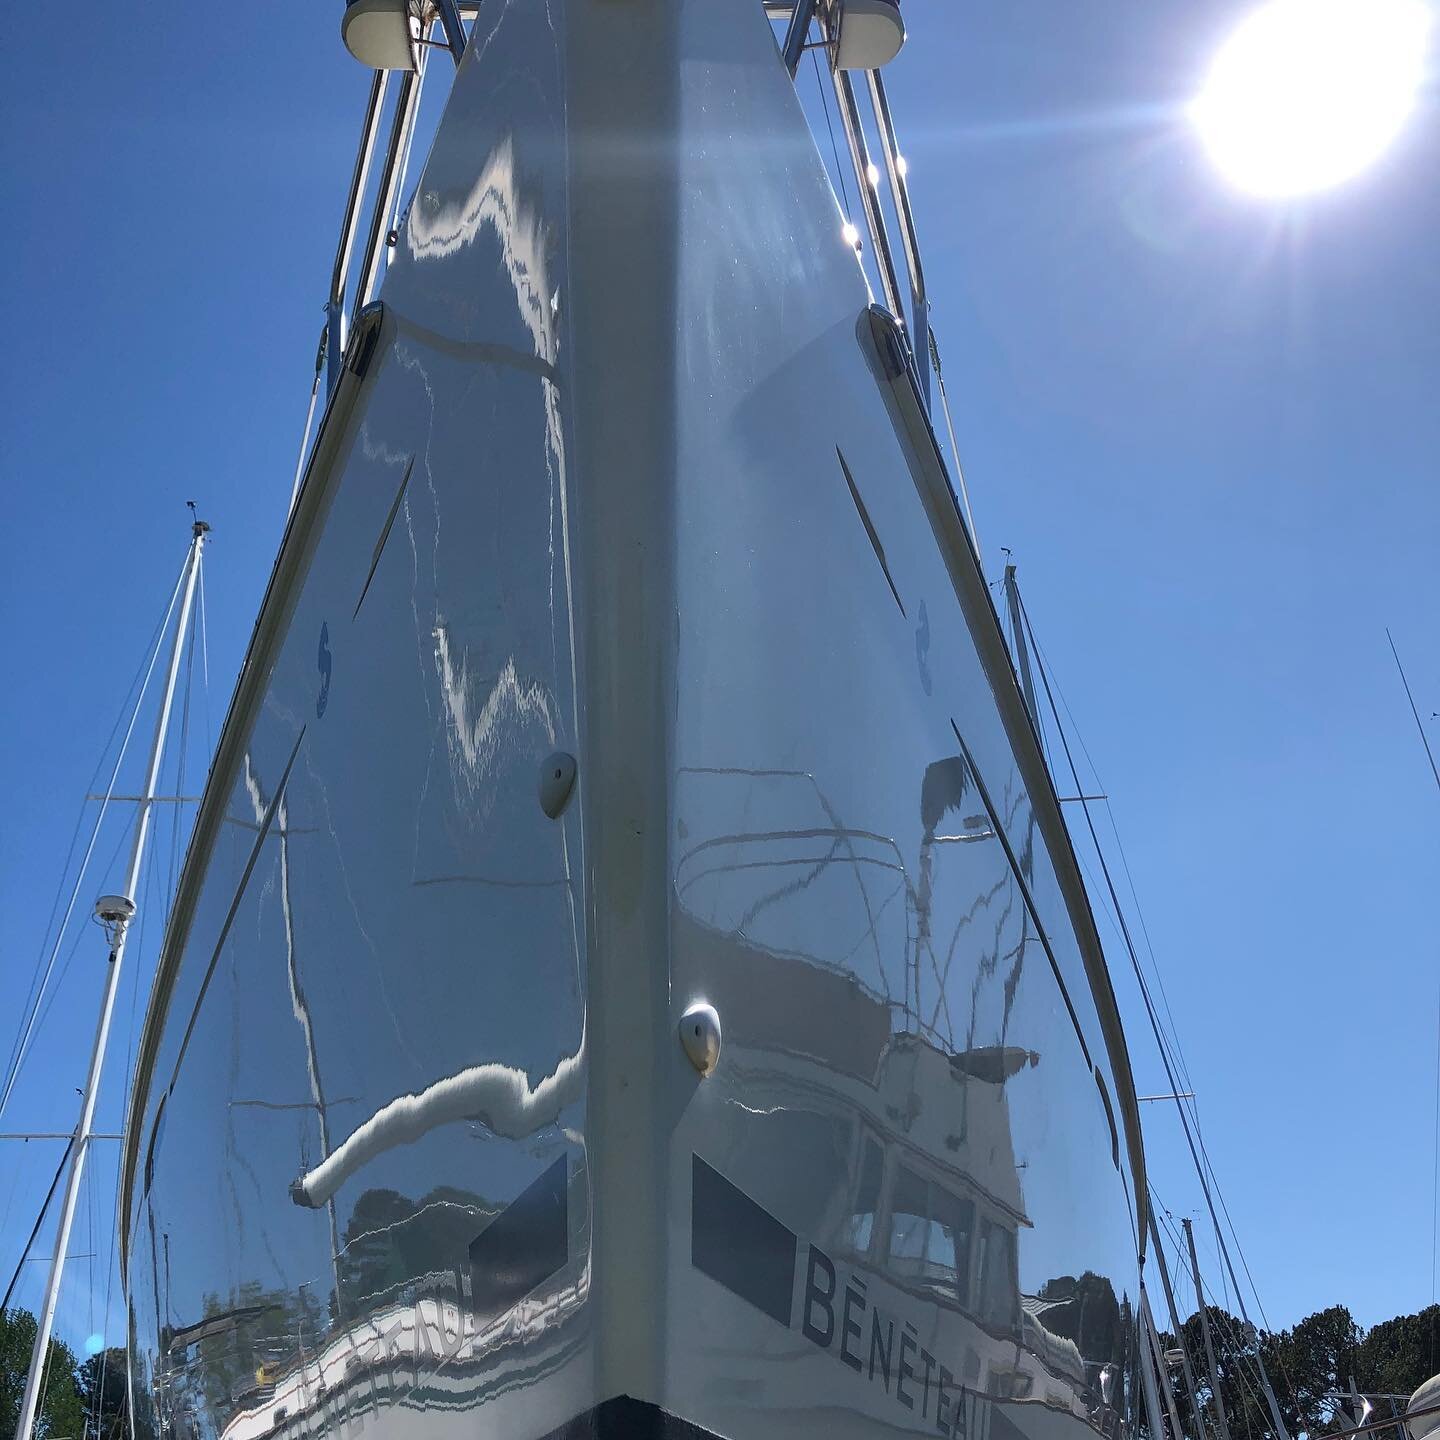 Still searching for the perfect gift for your &ldquo;hard to shop for&rdquo; guy or gal?

How about something SHINY!

Spring will be here before we know it (we can&rsquo;t wait!!!) and there is no better way to start the boating season than in a SHIN